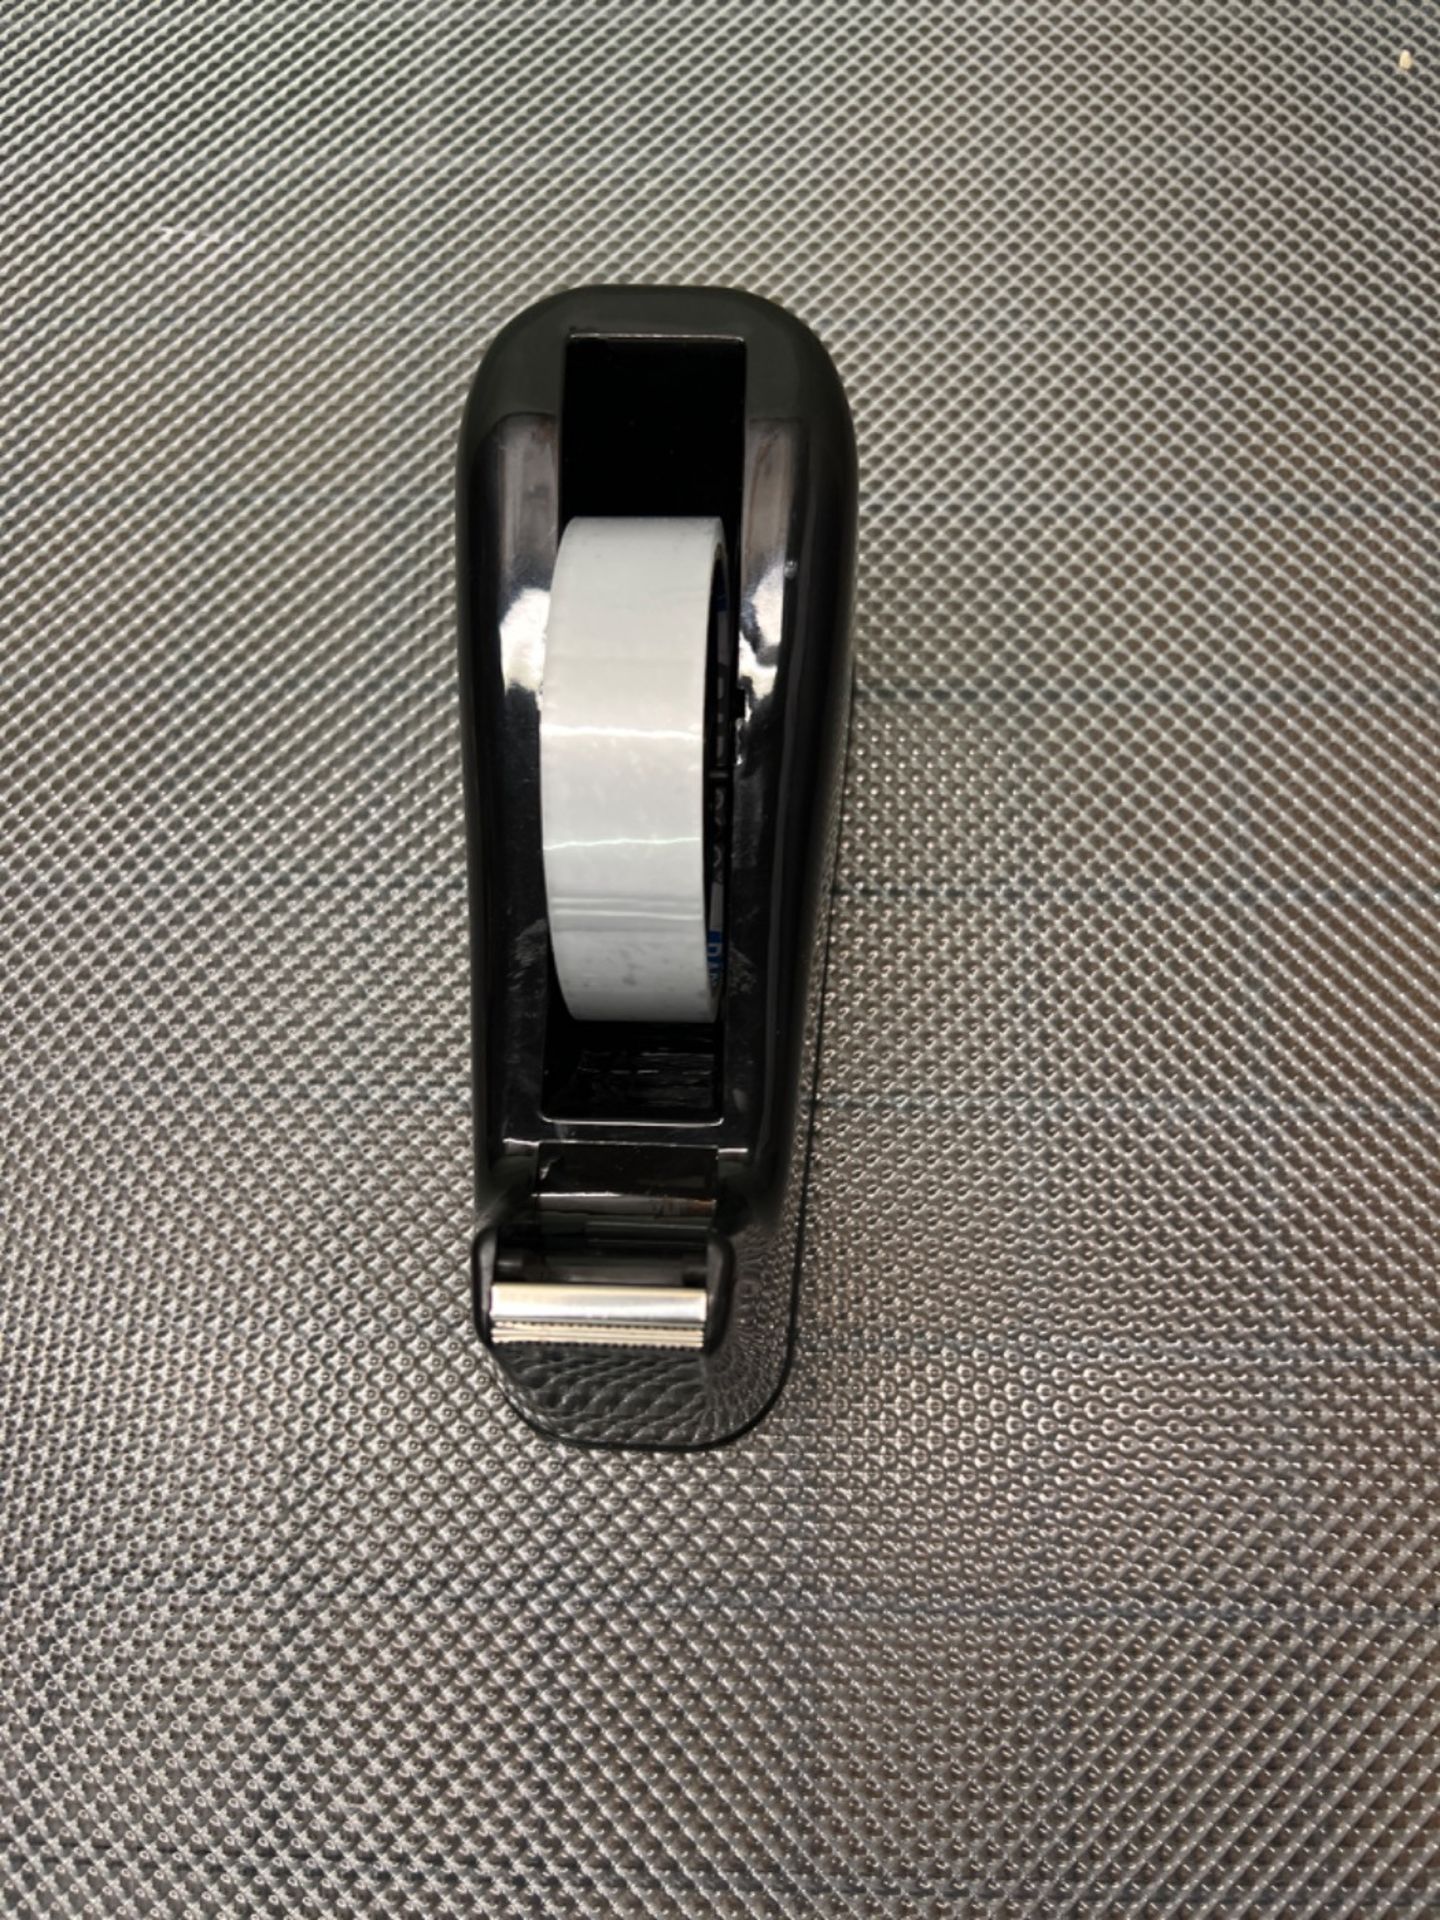 Heavy Duty, Tape Dispenser - Weighted, Non-Skid Rubber Base - High-Quality, Sharp Cutting Blade - B - Image 2 of 3